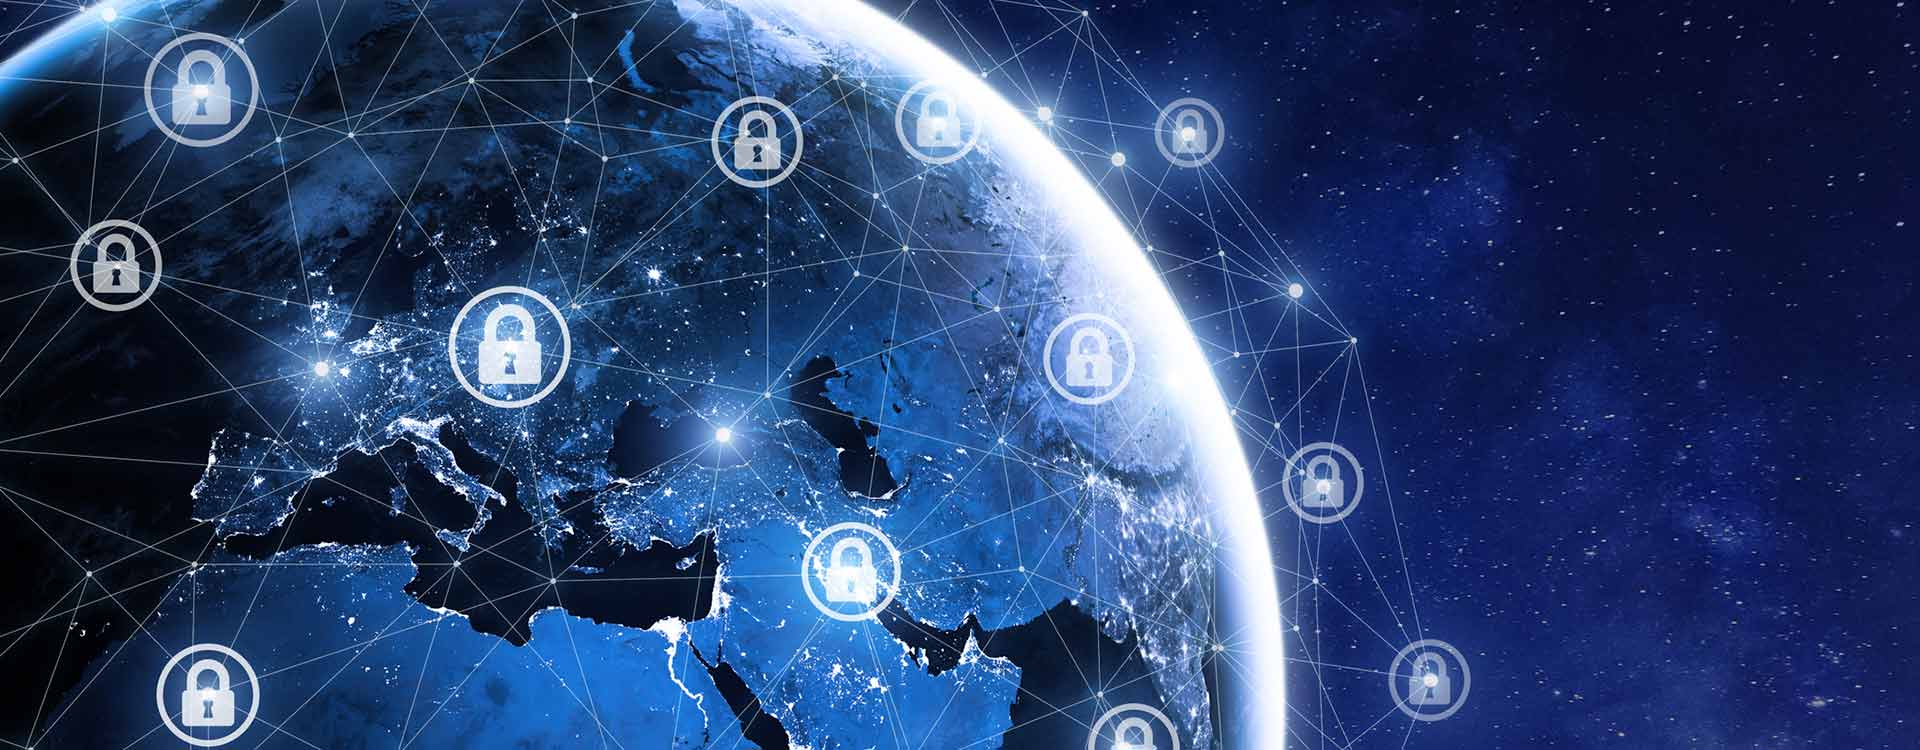 A digital illustration depicting earth from space with glowing secure lock icons connected by lines over continents, symbolizing global cybersecurity networks.